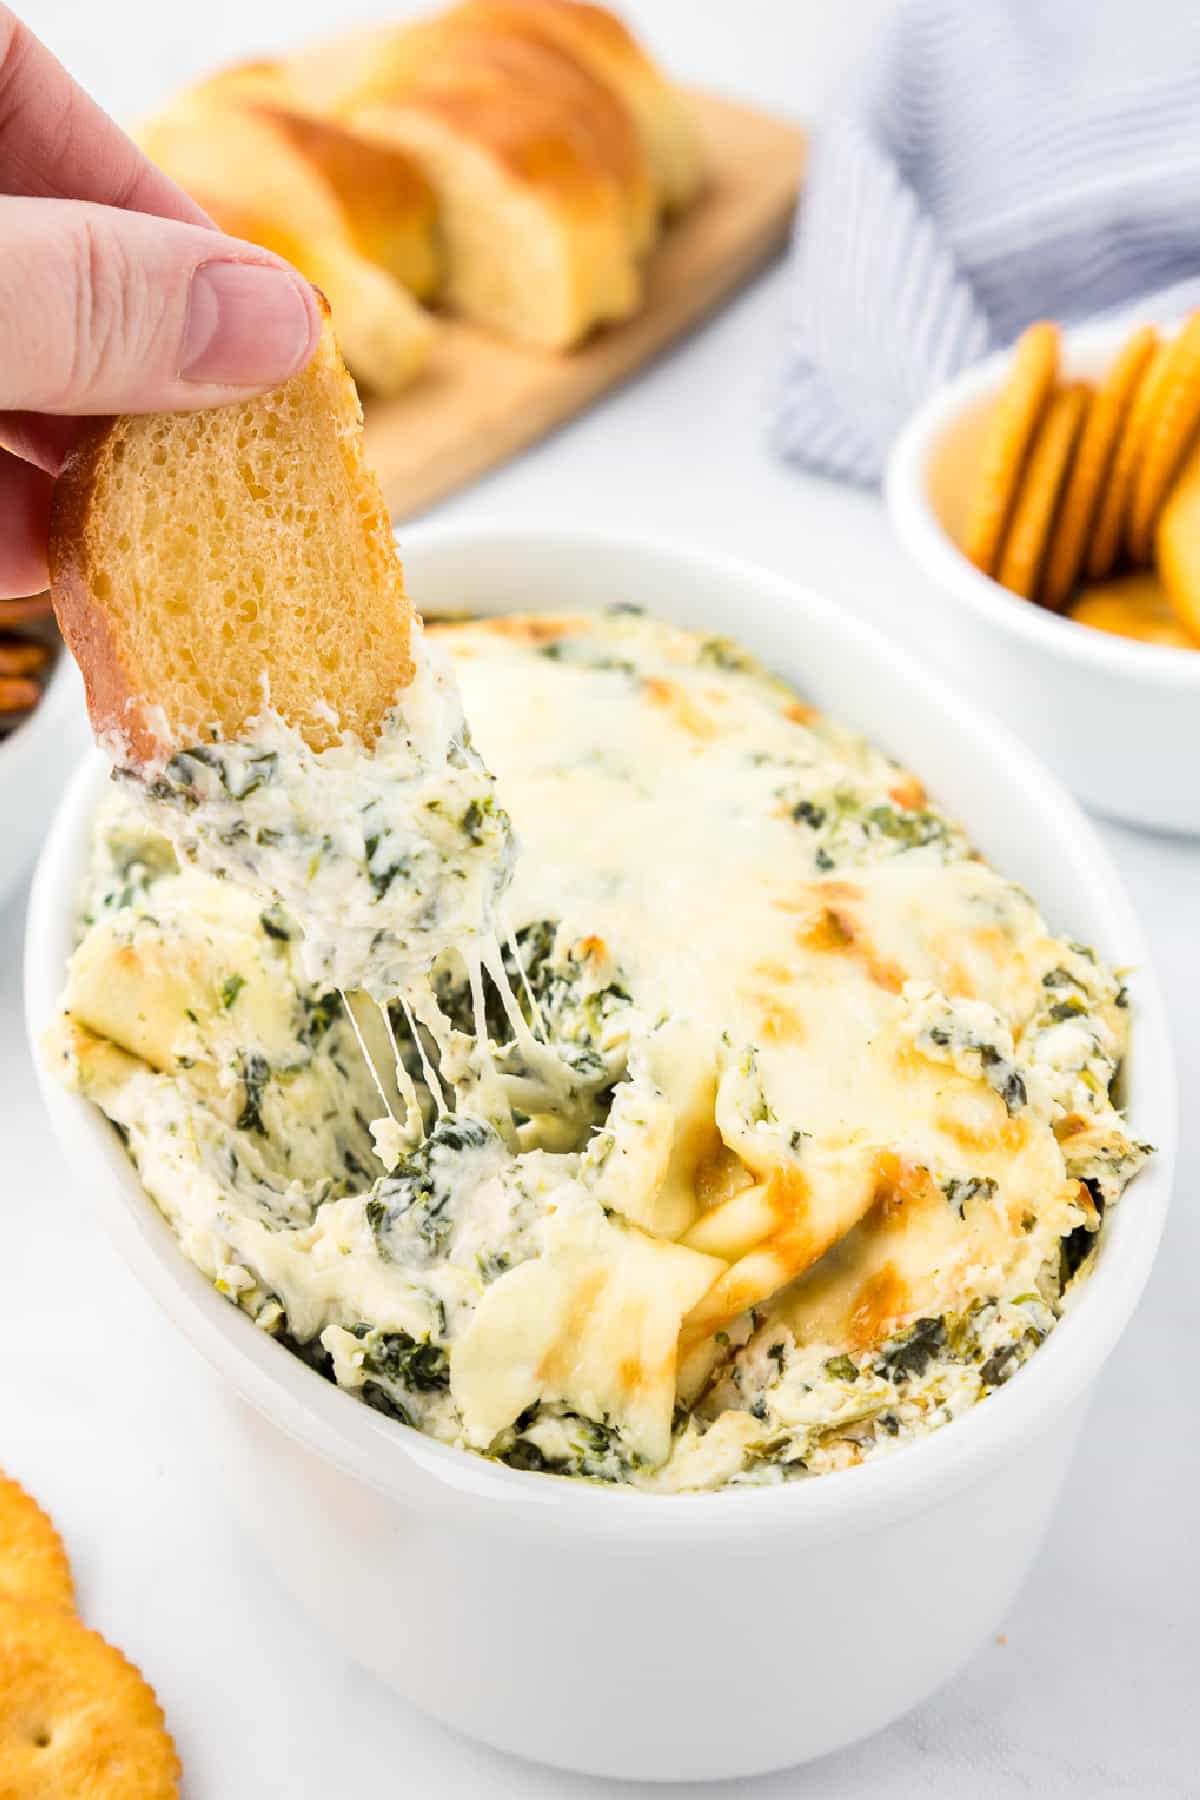 A person's hand dipping a piece of chewy bread into a bowl of cheesy spinach dip.